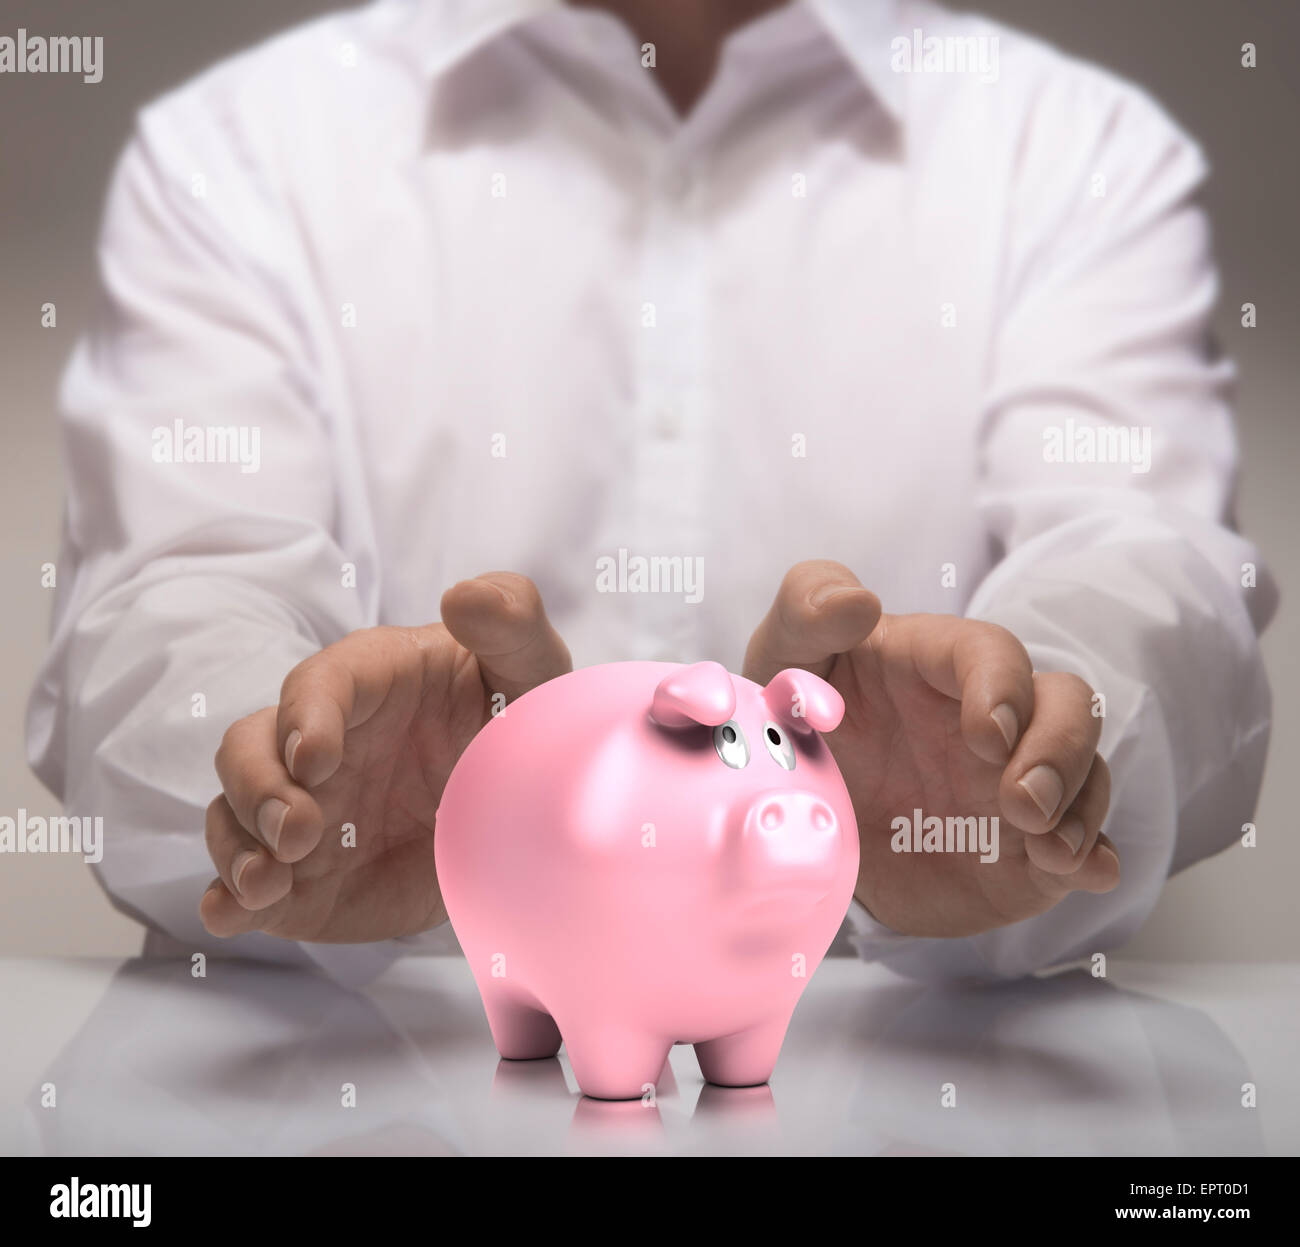 Man hands protect piggy bank. Finance concept illustration of savings or good credit. Stock Photo